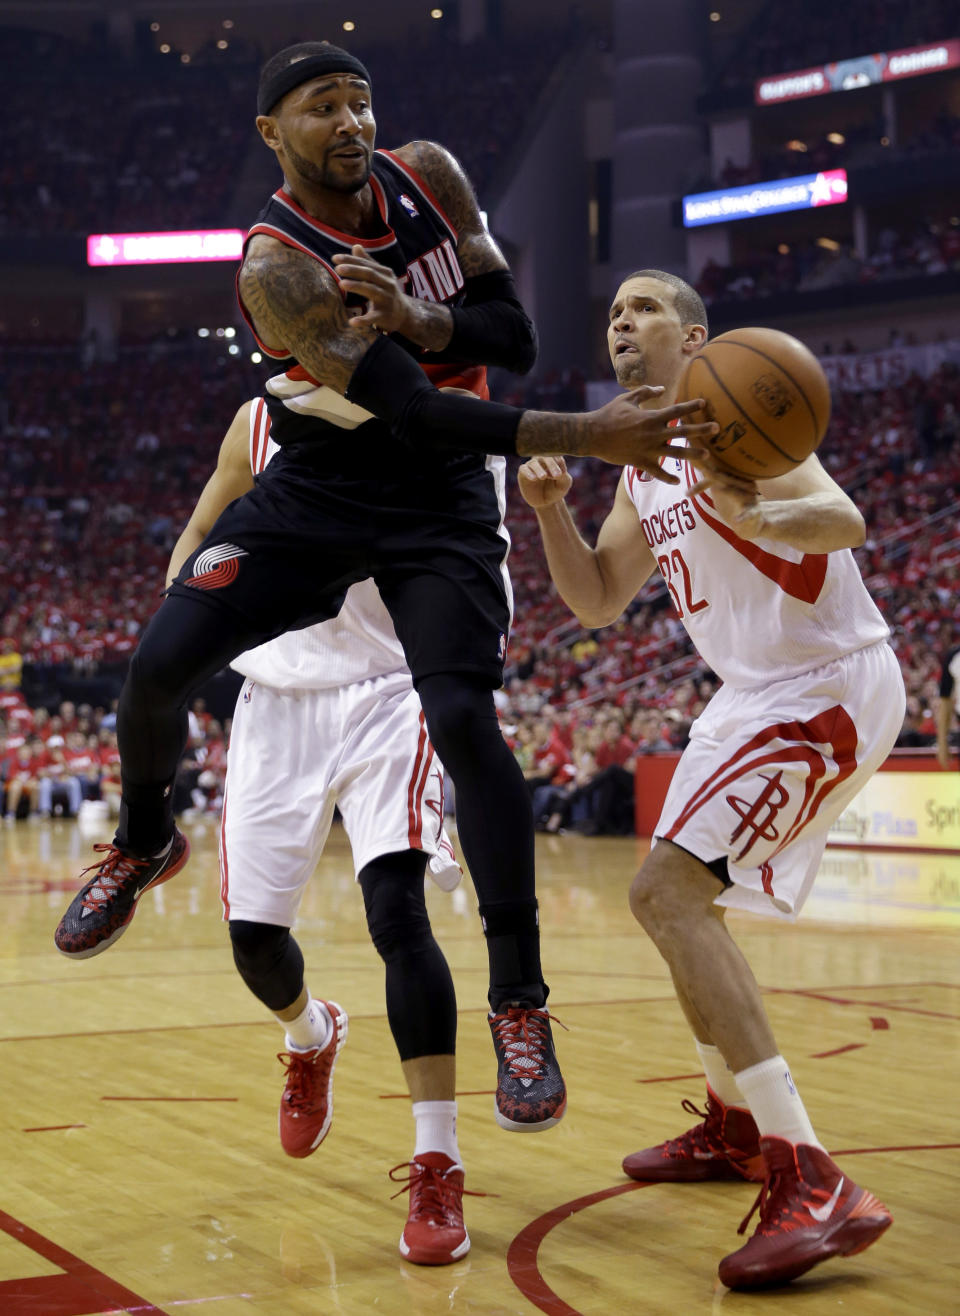 Portland Trail Blazers' Mo Williams (25) passes the ball around Houston Rockets' Francisco Garcia (32) during the second quarter in Game 1 of an opening-round NBA basketball playoff series Sunday, April 20, 2014, in Houston. (AP Photo/David J. Phillip)